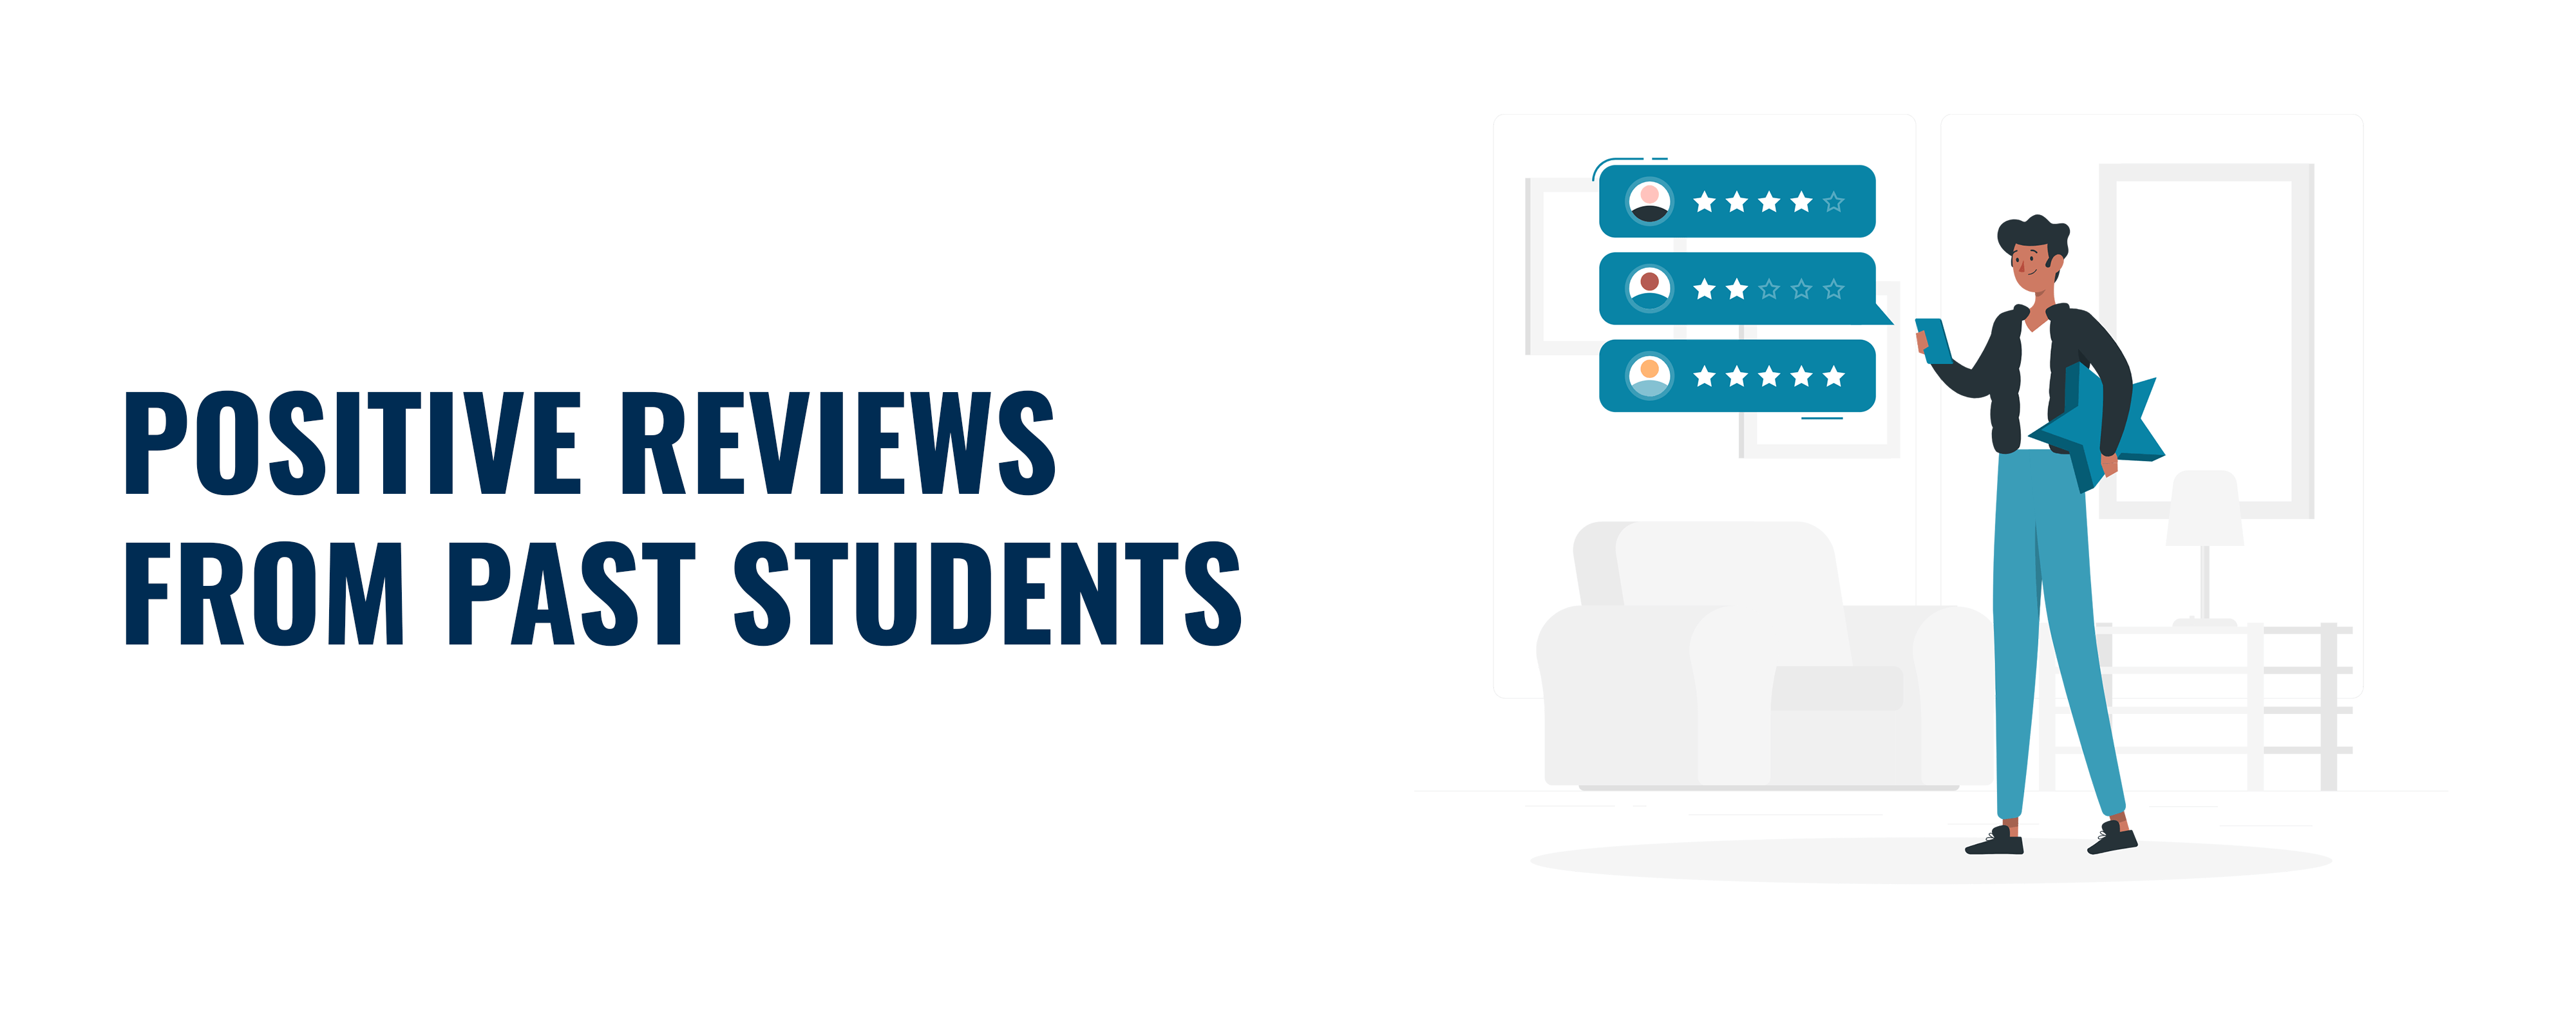 Positive Reviews from Past Students